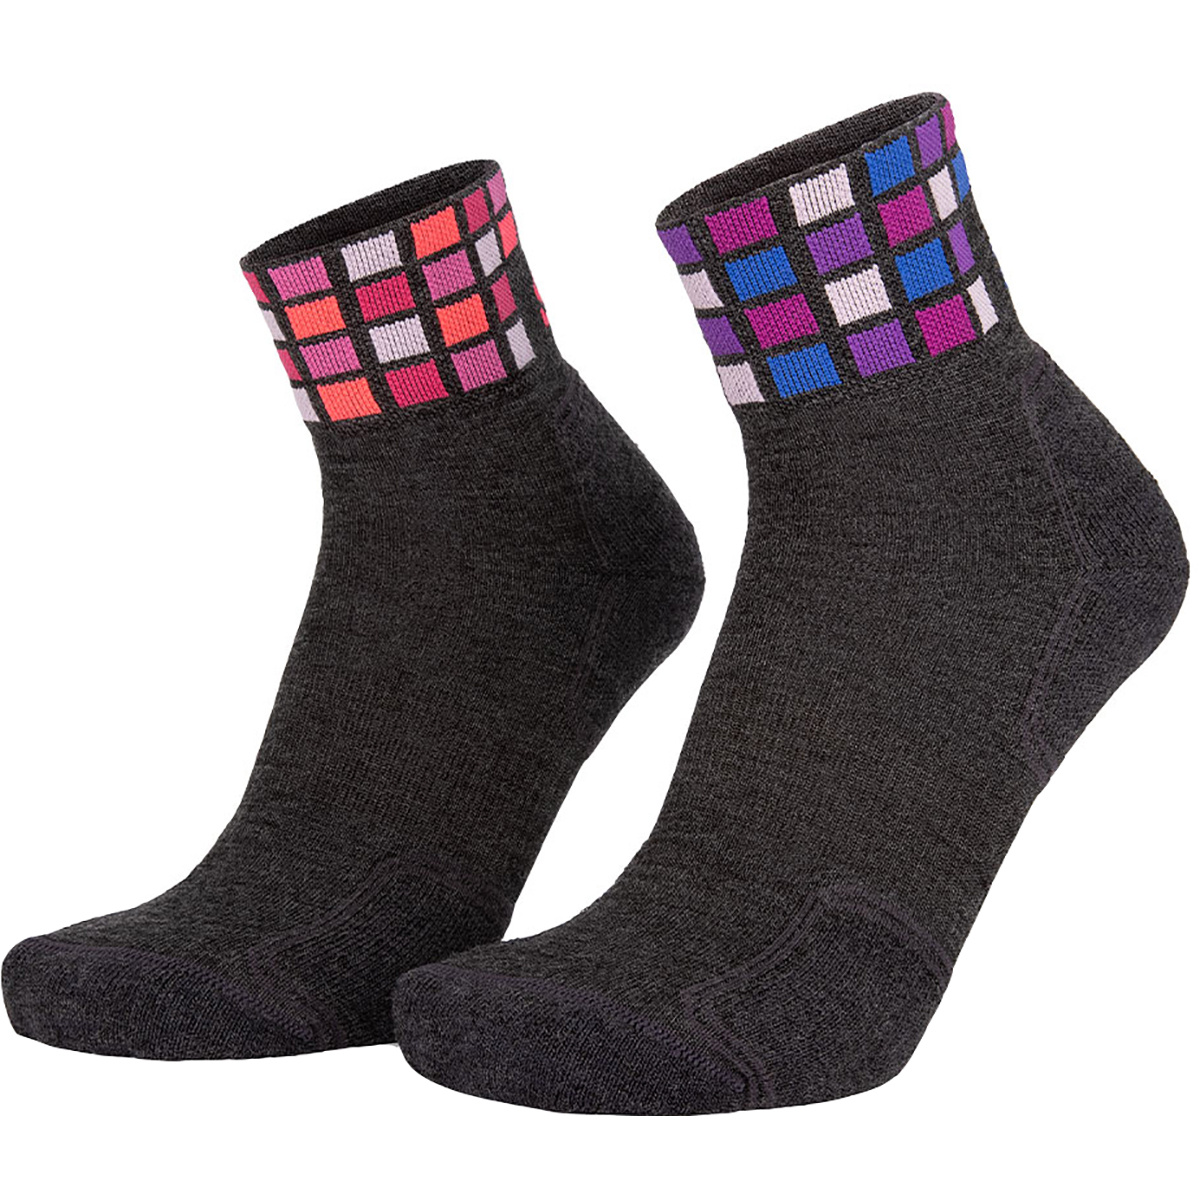 Image of Eightsox Donna Calze in lana merino mid Color in pack da 2